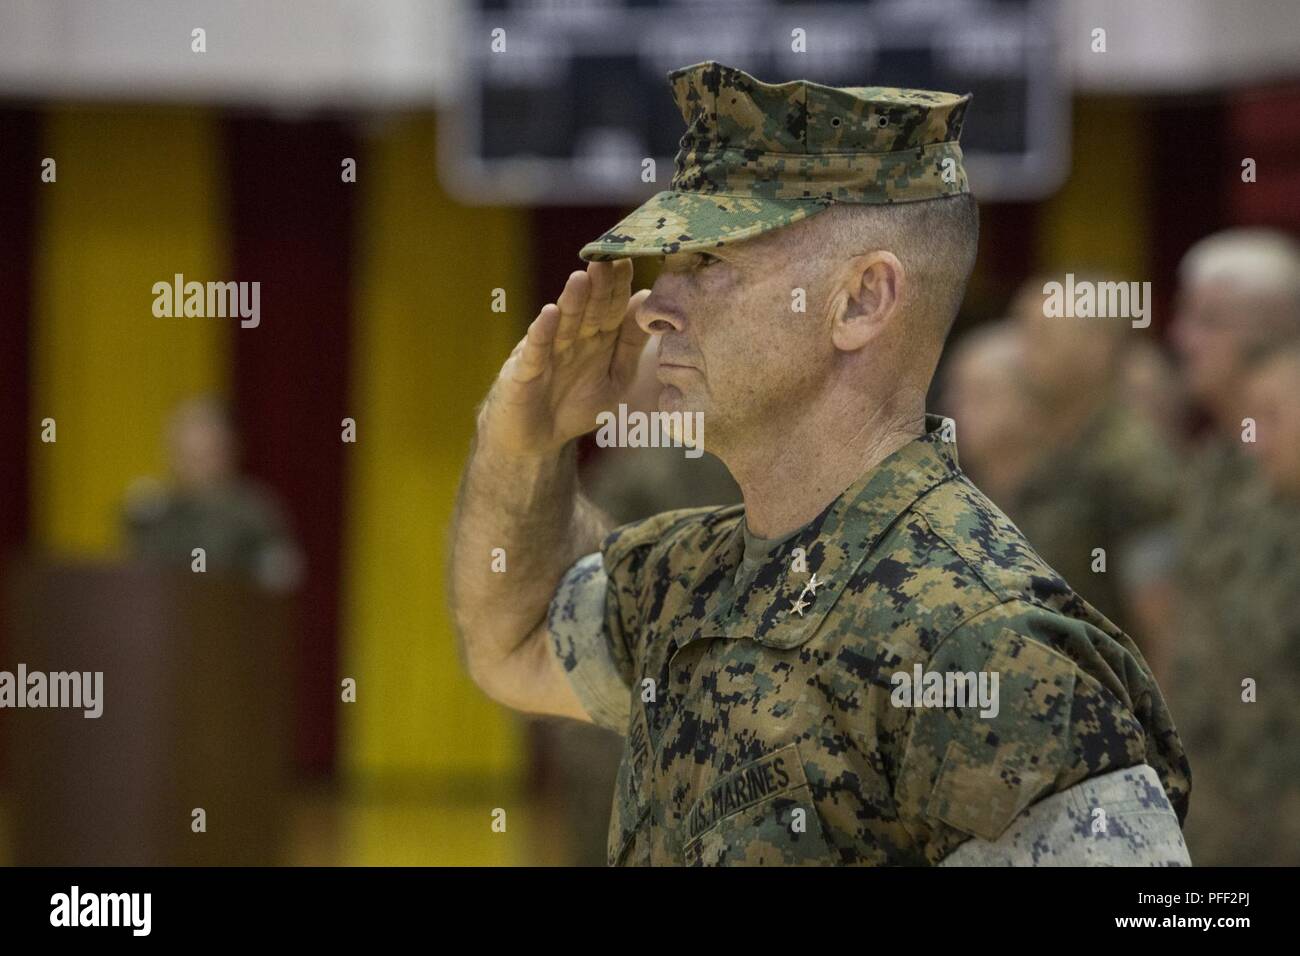 U.S. Marine Corps Maj. Gen. John K. Love, the Commanding General of 2nd Marine Division, salutes during the 6th Marine Regiment change of command ceremony at Camp Lejeune, N.C., June 12, 2018. During the ceremony, Col. Matthew S. Reid relinquished command of the unit to Col. Daniel T. Canfield Jr. Stock Photo